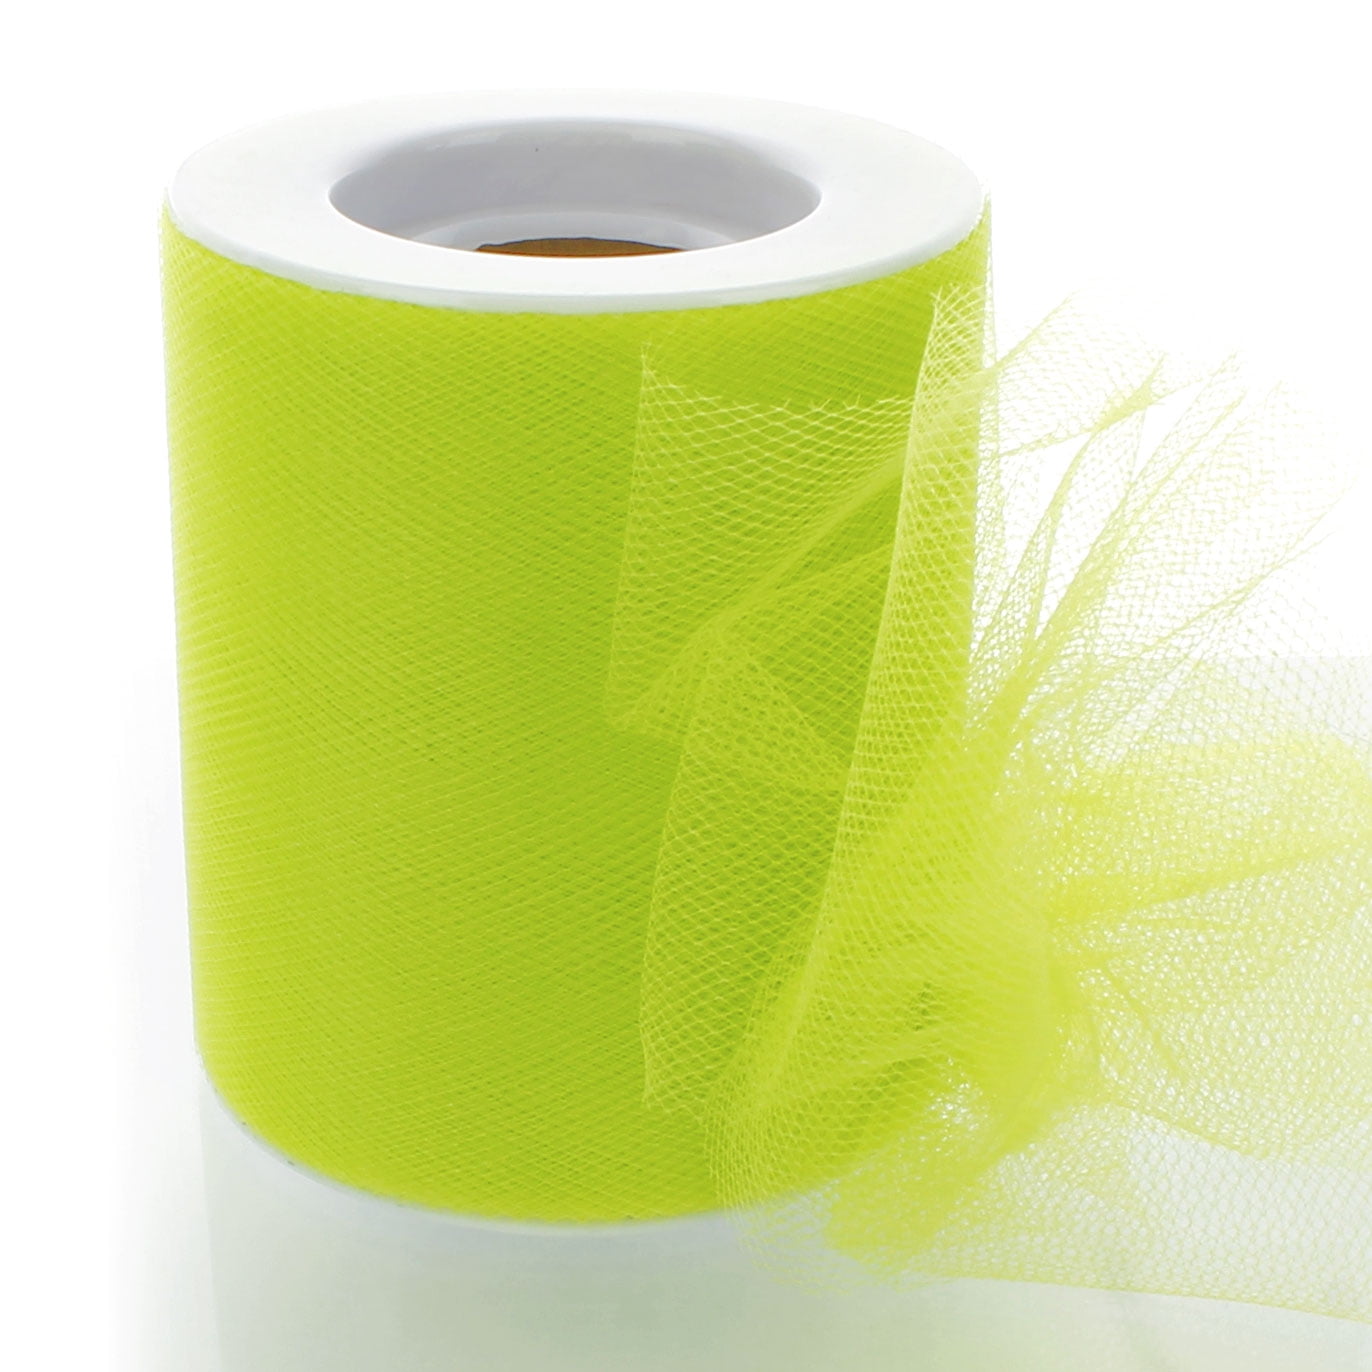 Grass Green Roll of 6 Inch Tulle Fabric 25yds for Gift Wrapping Wedding Bow Banquet Decoration Craft 